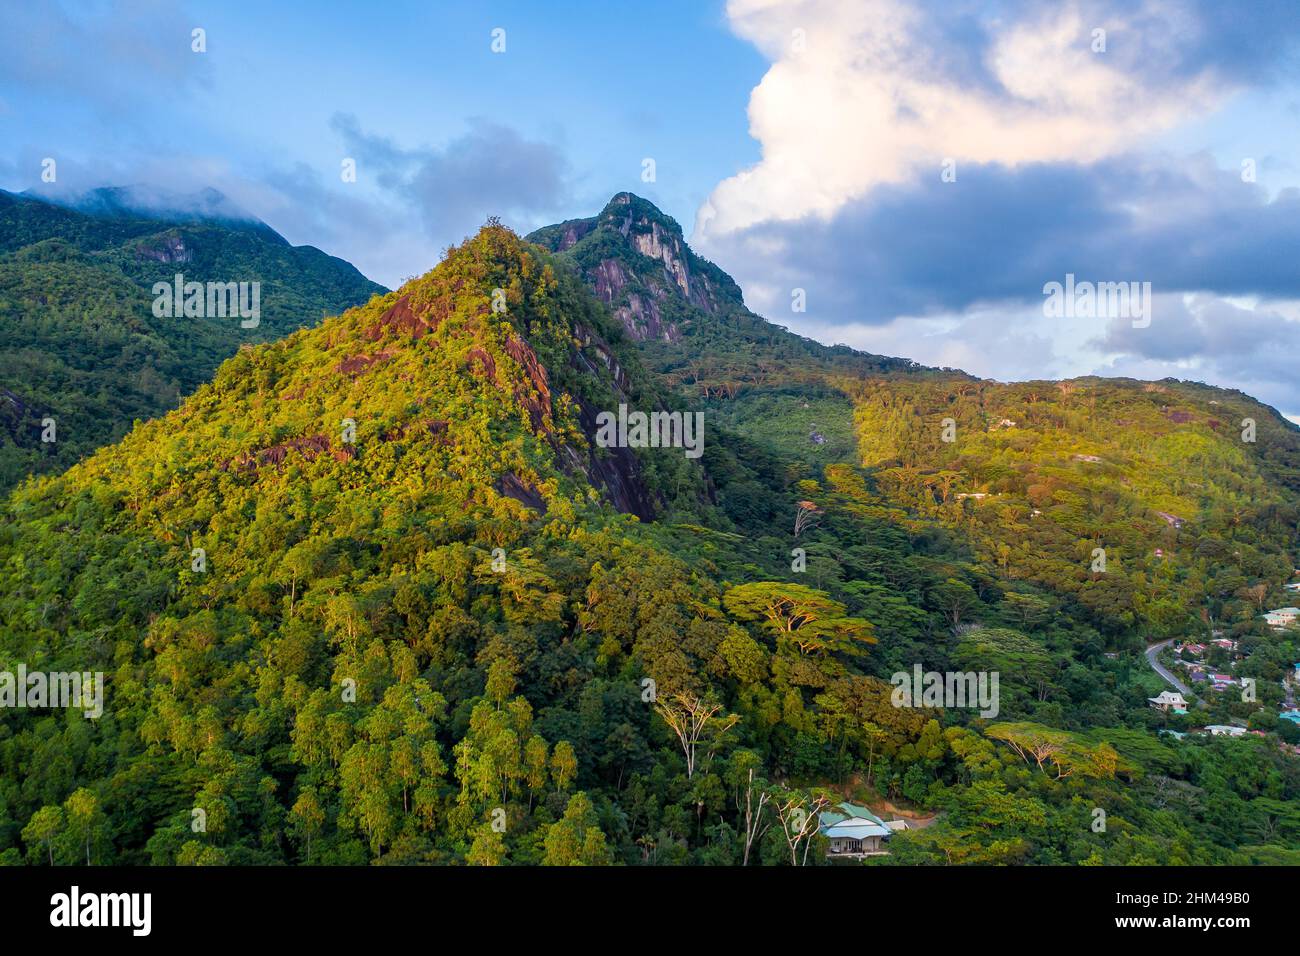 Morne Seychellois National Park aerial view from drone during sunset, golden hour, with lush tropical mountains, Mahe Island, Seychelles. Stock Photo